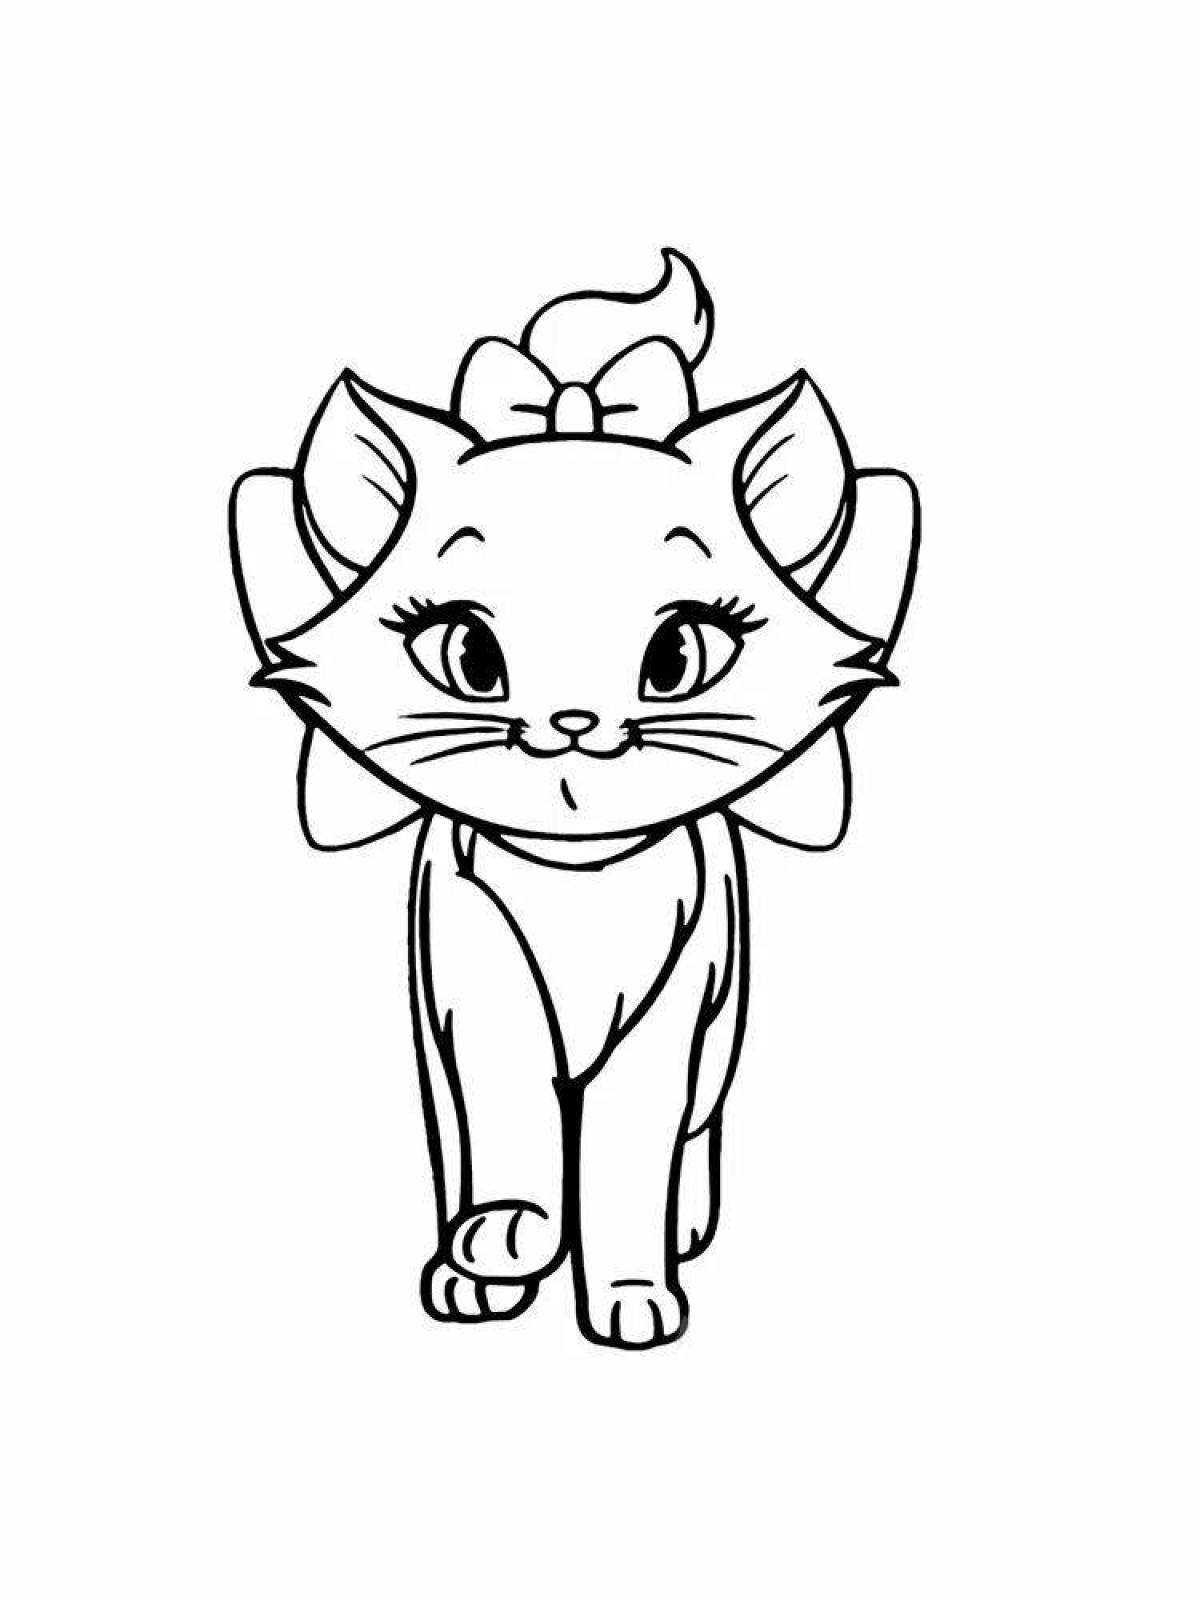 Coloring page adorable kitten with a bow